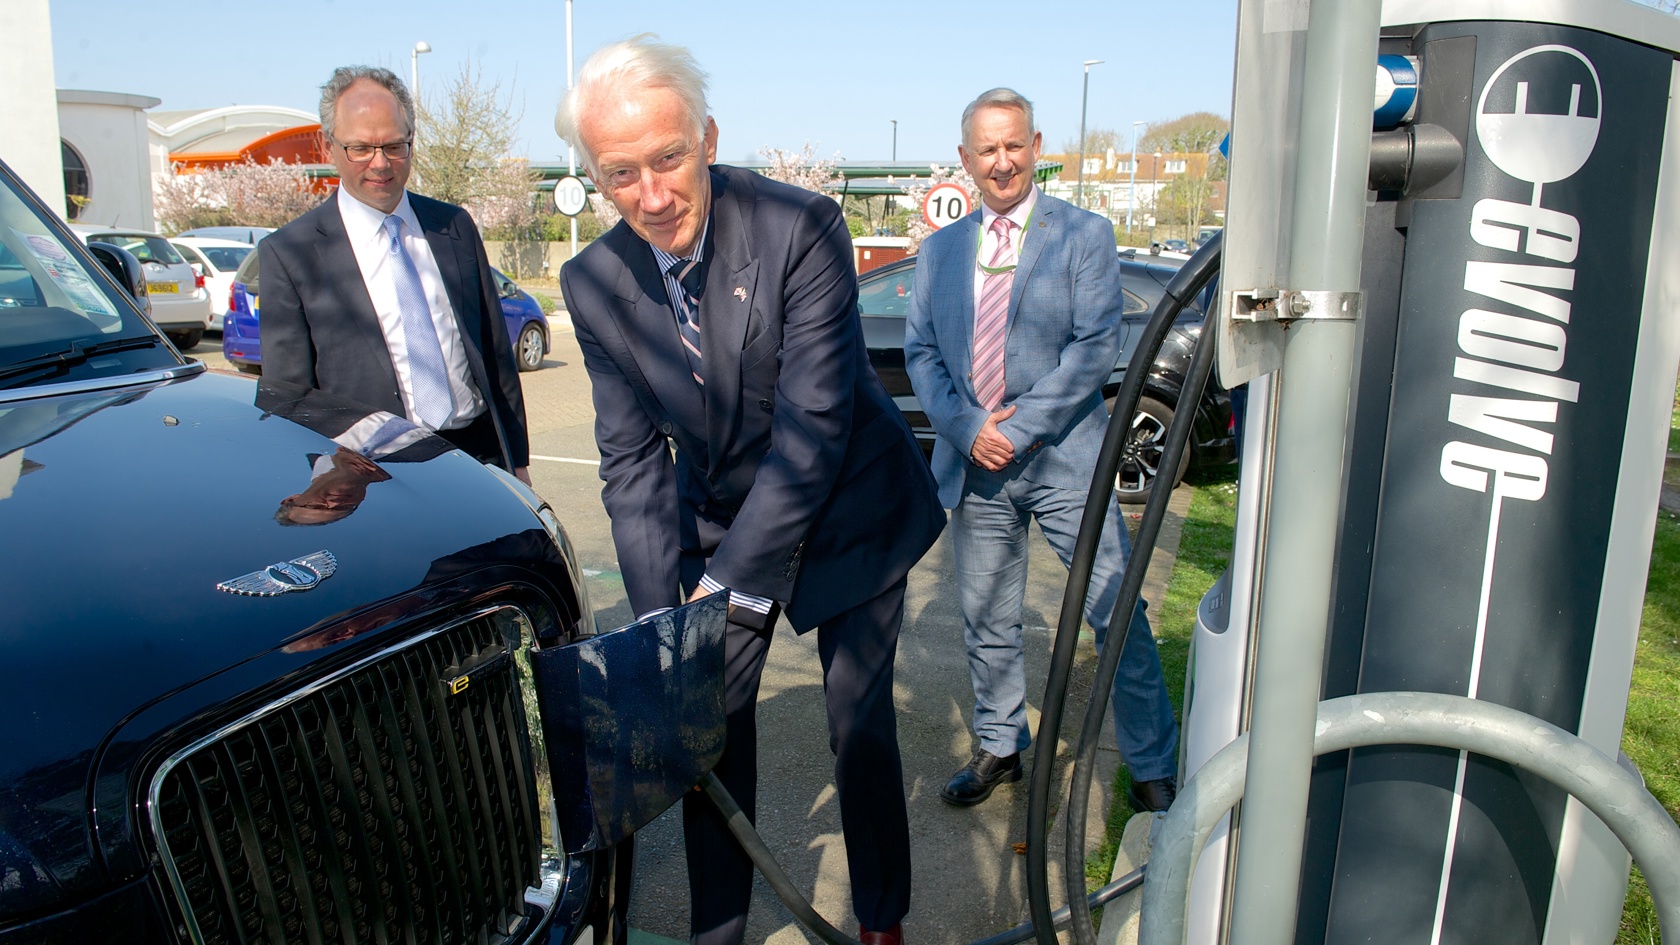 Lieutenant Governor charges an electric car at Powerhouse